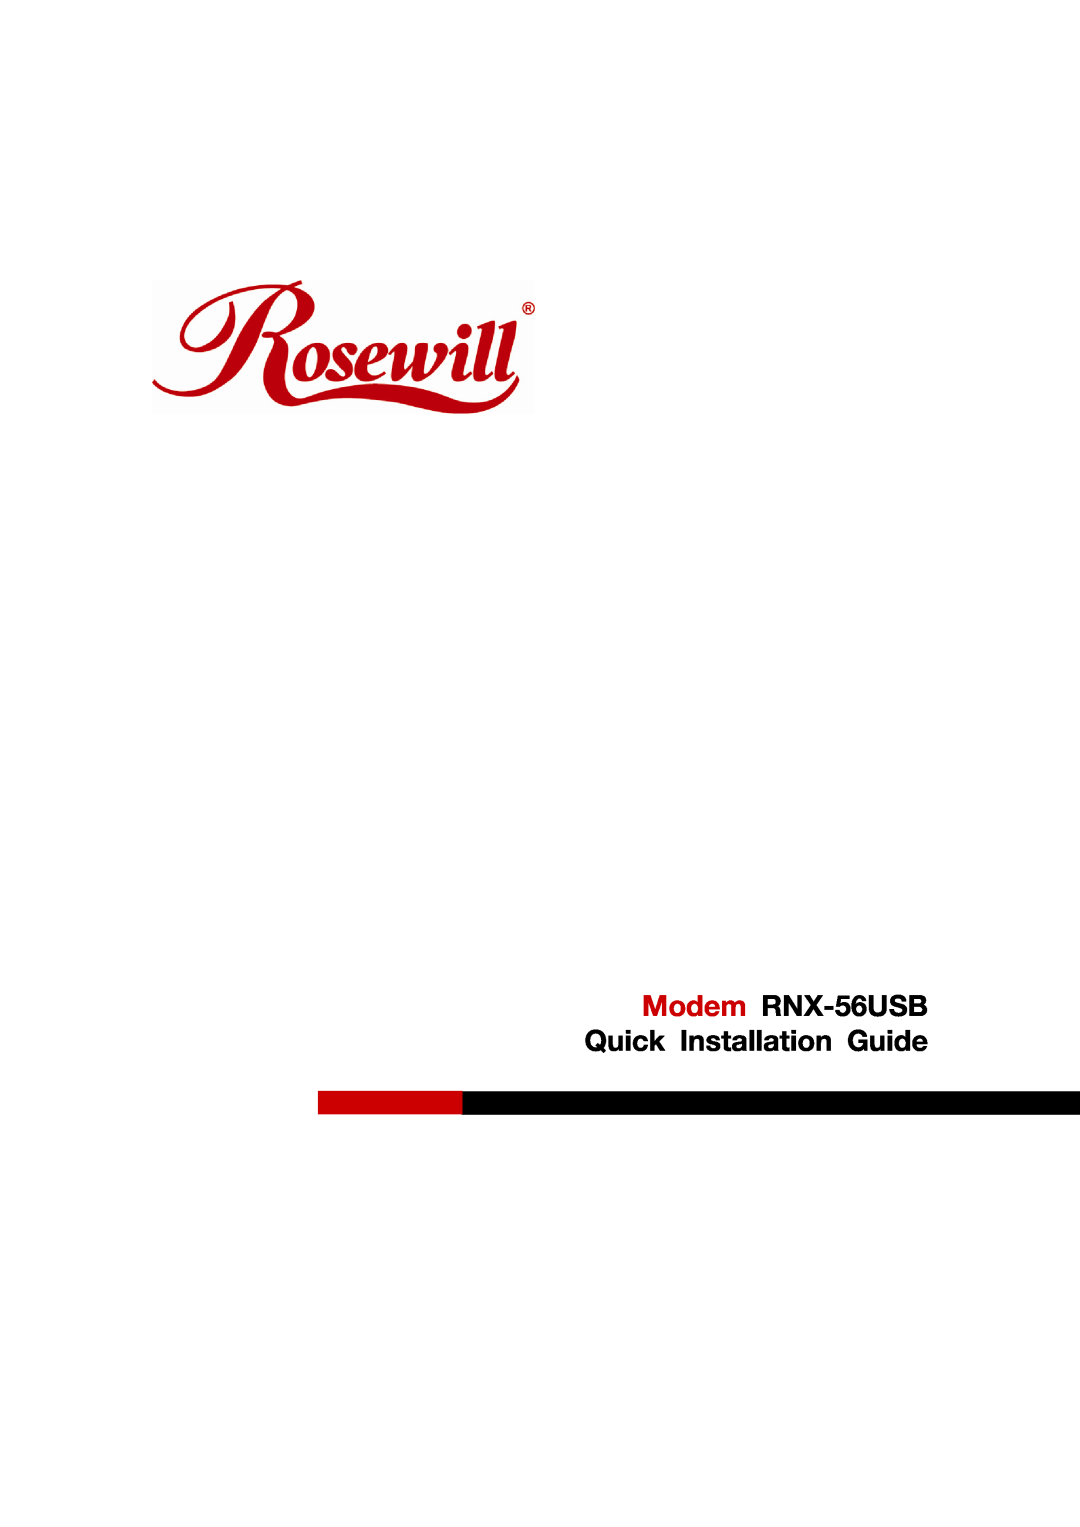 Rosewill manual Modem RNX-56USB Quick Installation Guide 